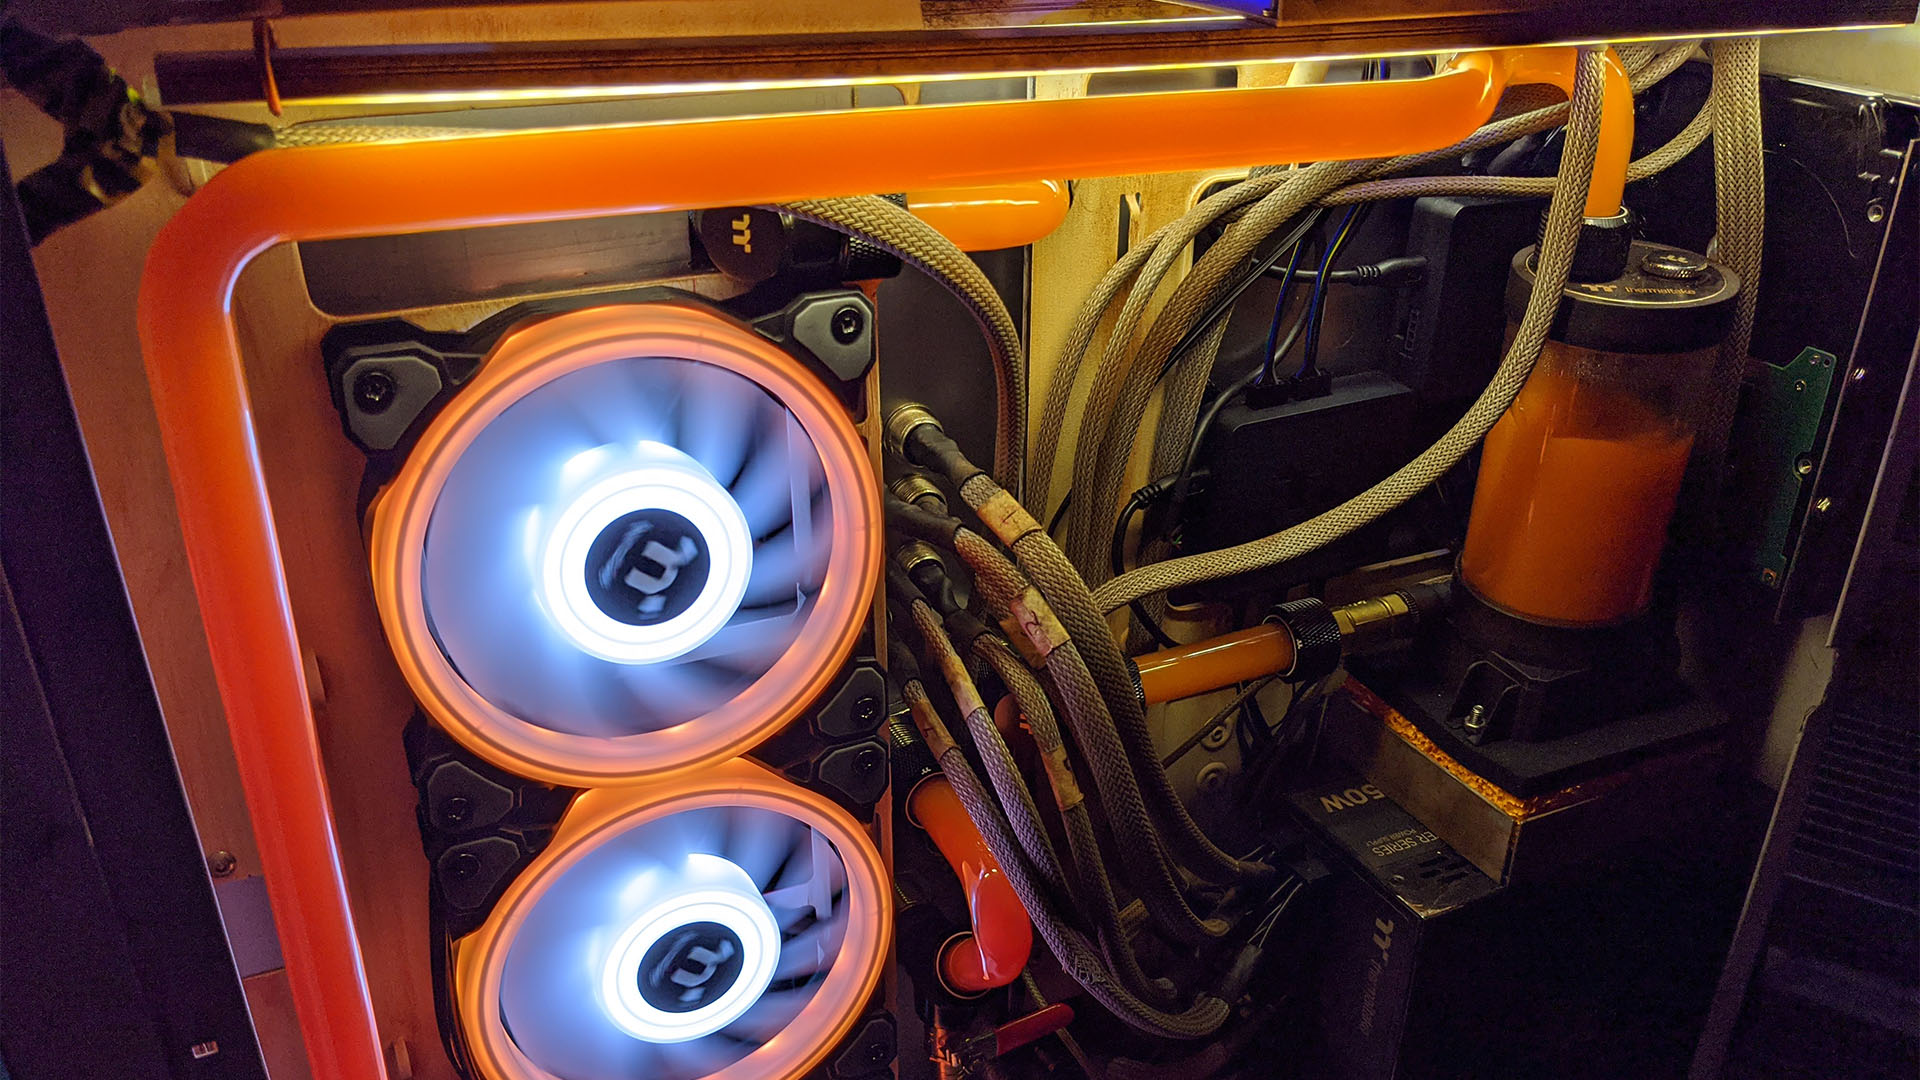 The cable management on the Division 2 gaming pc